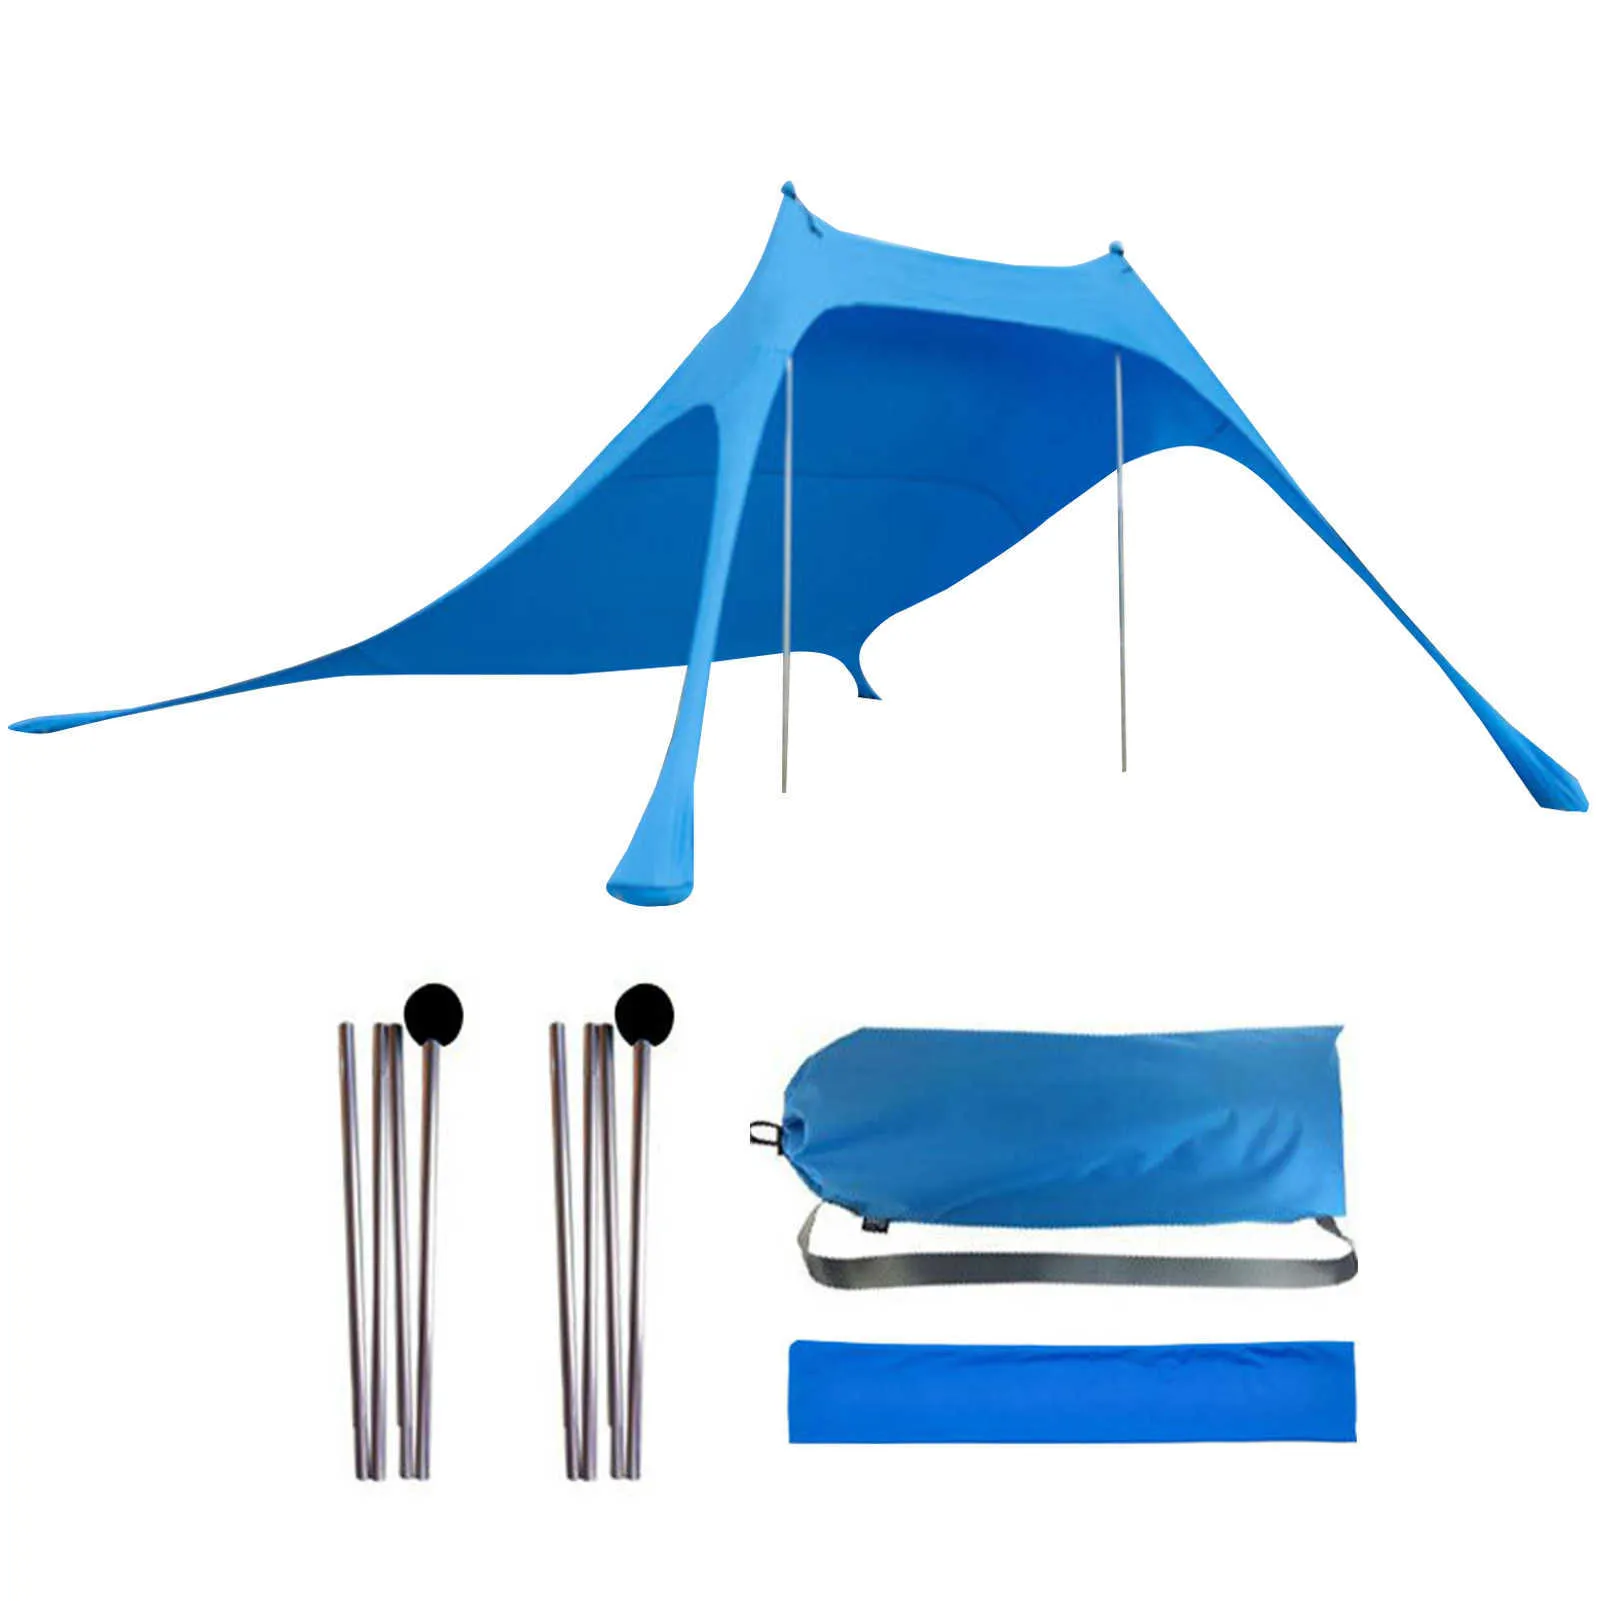 Tents and Shelters Portable Sunscreen Sand Free Beach Tent Beach Canopy Fishing Camping Waterproof Rainproof Sunscreen Tent J230223